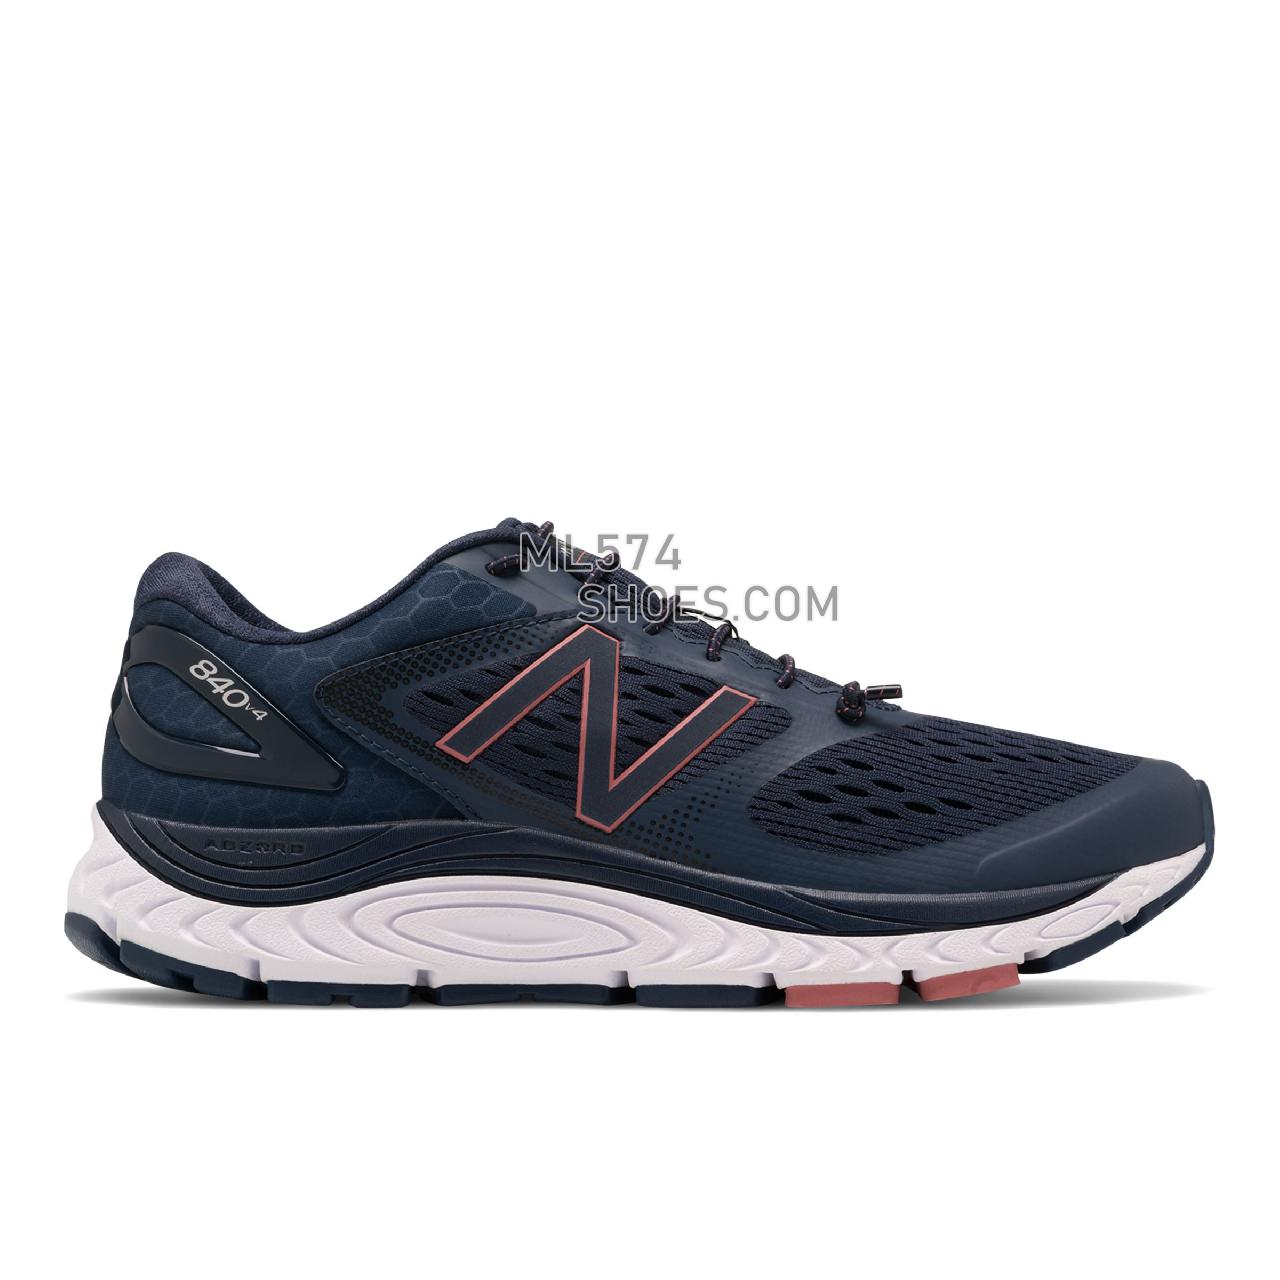 New Balance 840v4 - Women's Neutral Running - Natural Indigo with White and Off Road - W840BN4